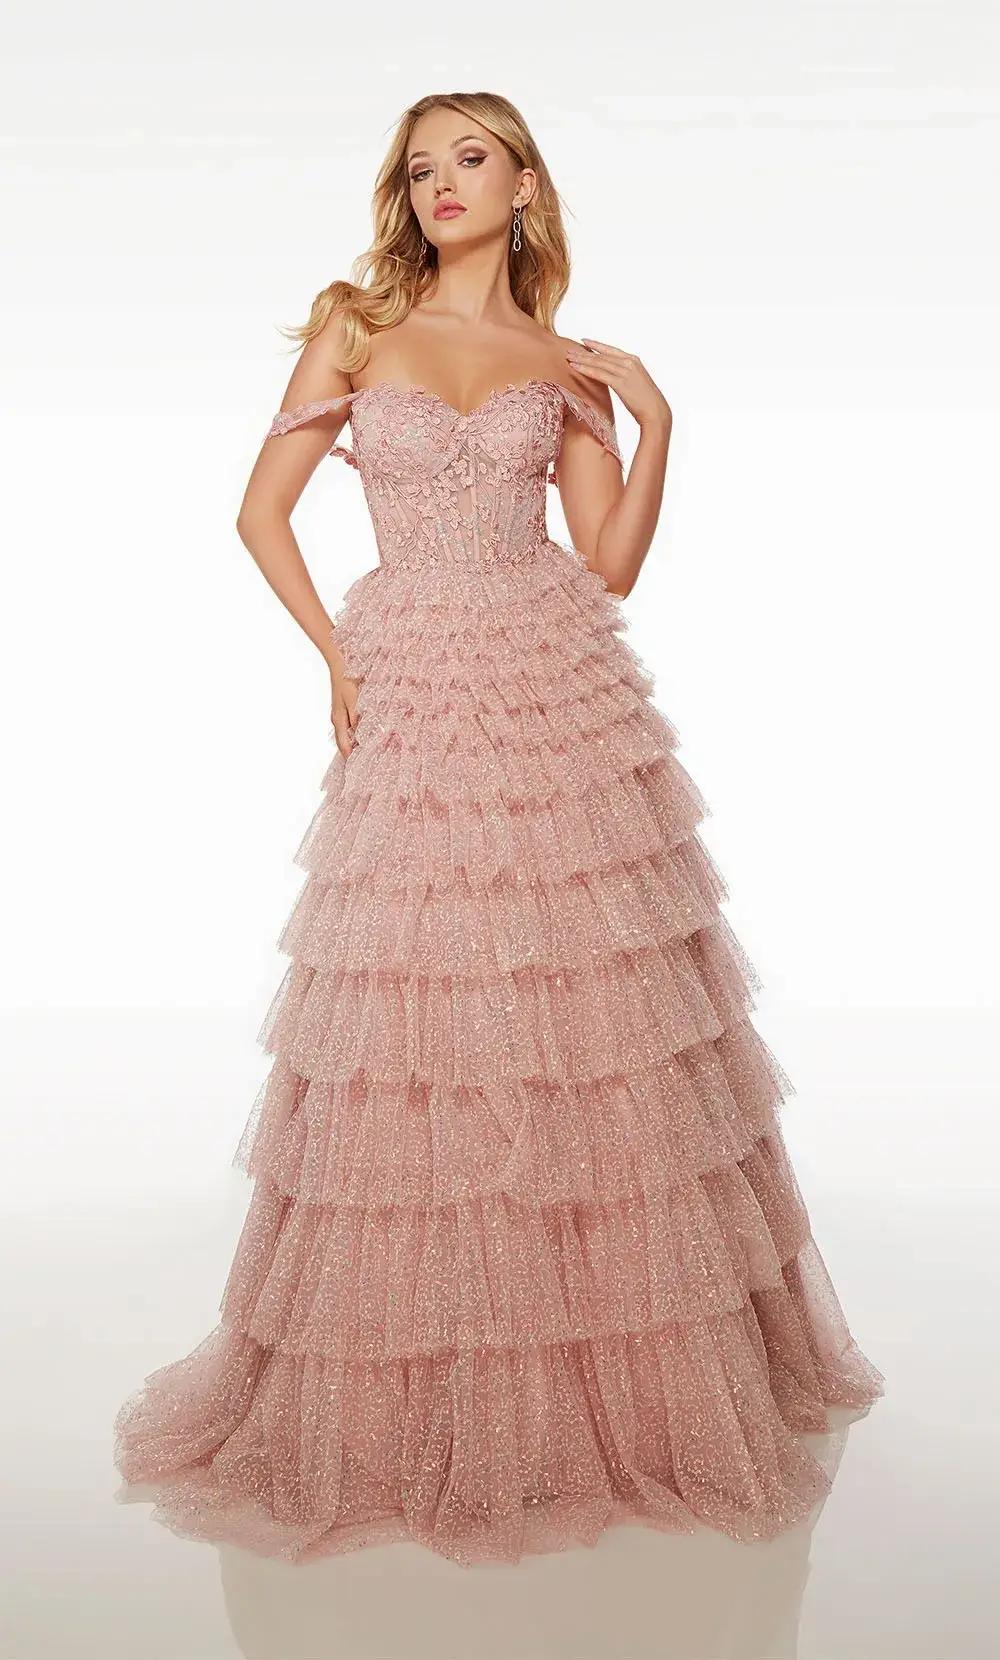 Exploring Ruffled Prom Dress Trends for the Season Image